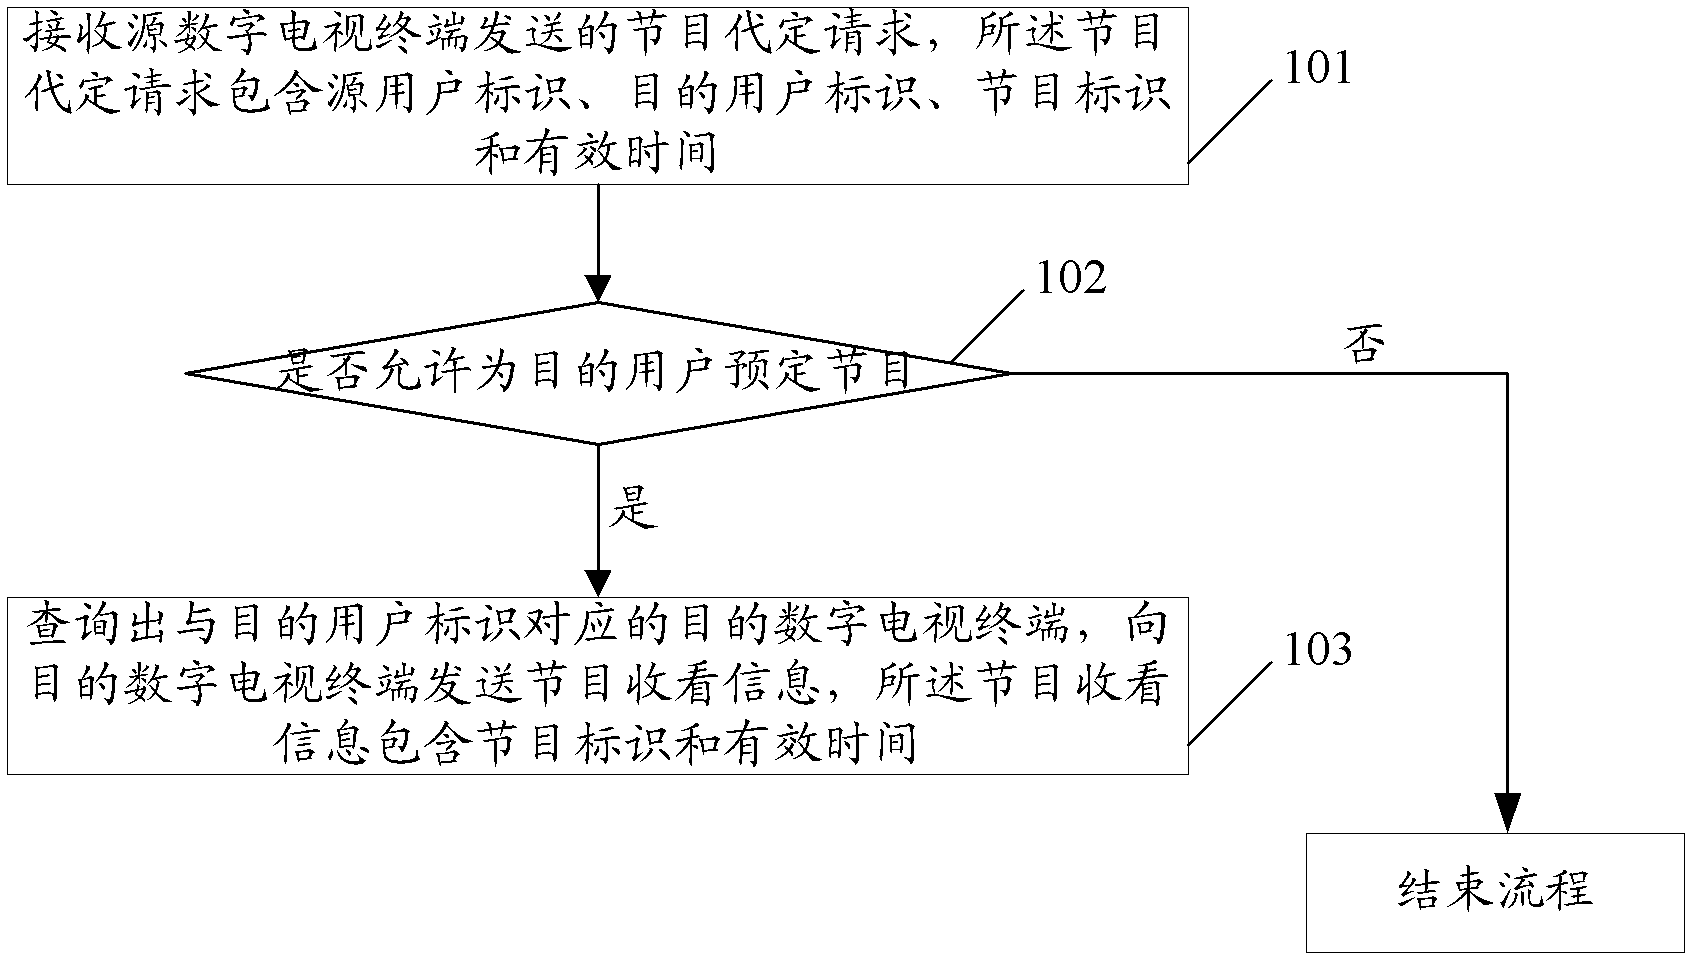 Method and system for predetermining digital television program